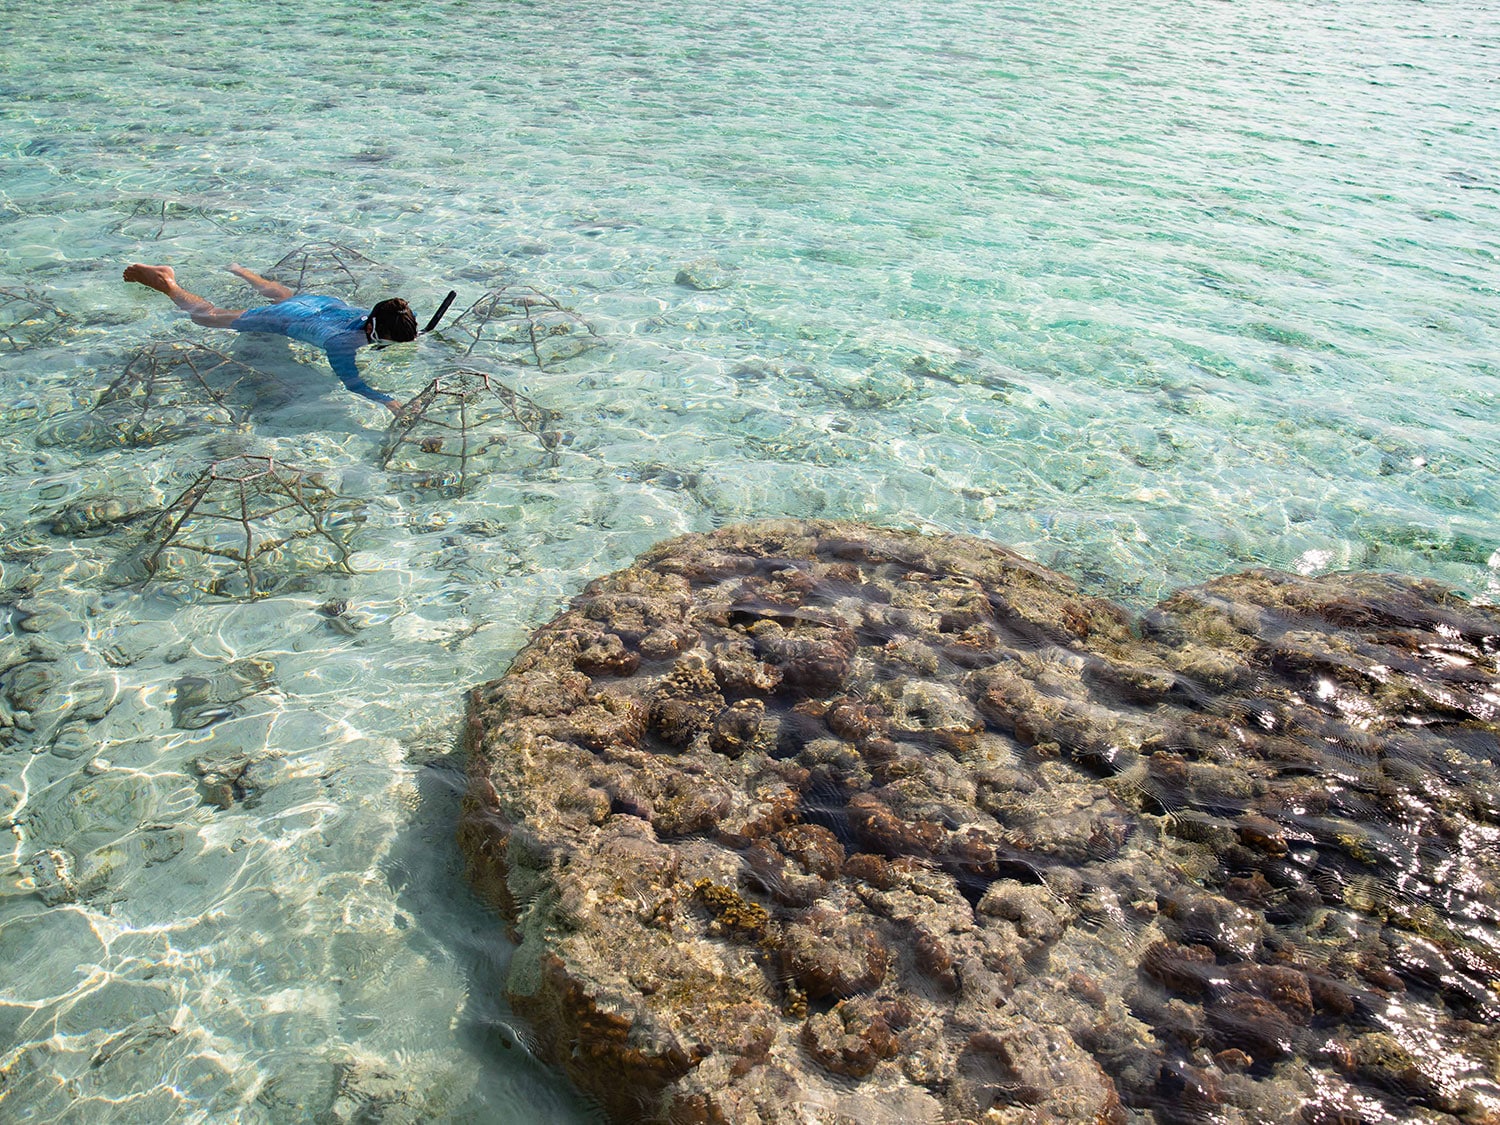 A snorkeler tends to new coral growth at the Patina Maldives, Fari Islands, resort.